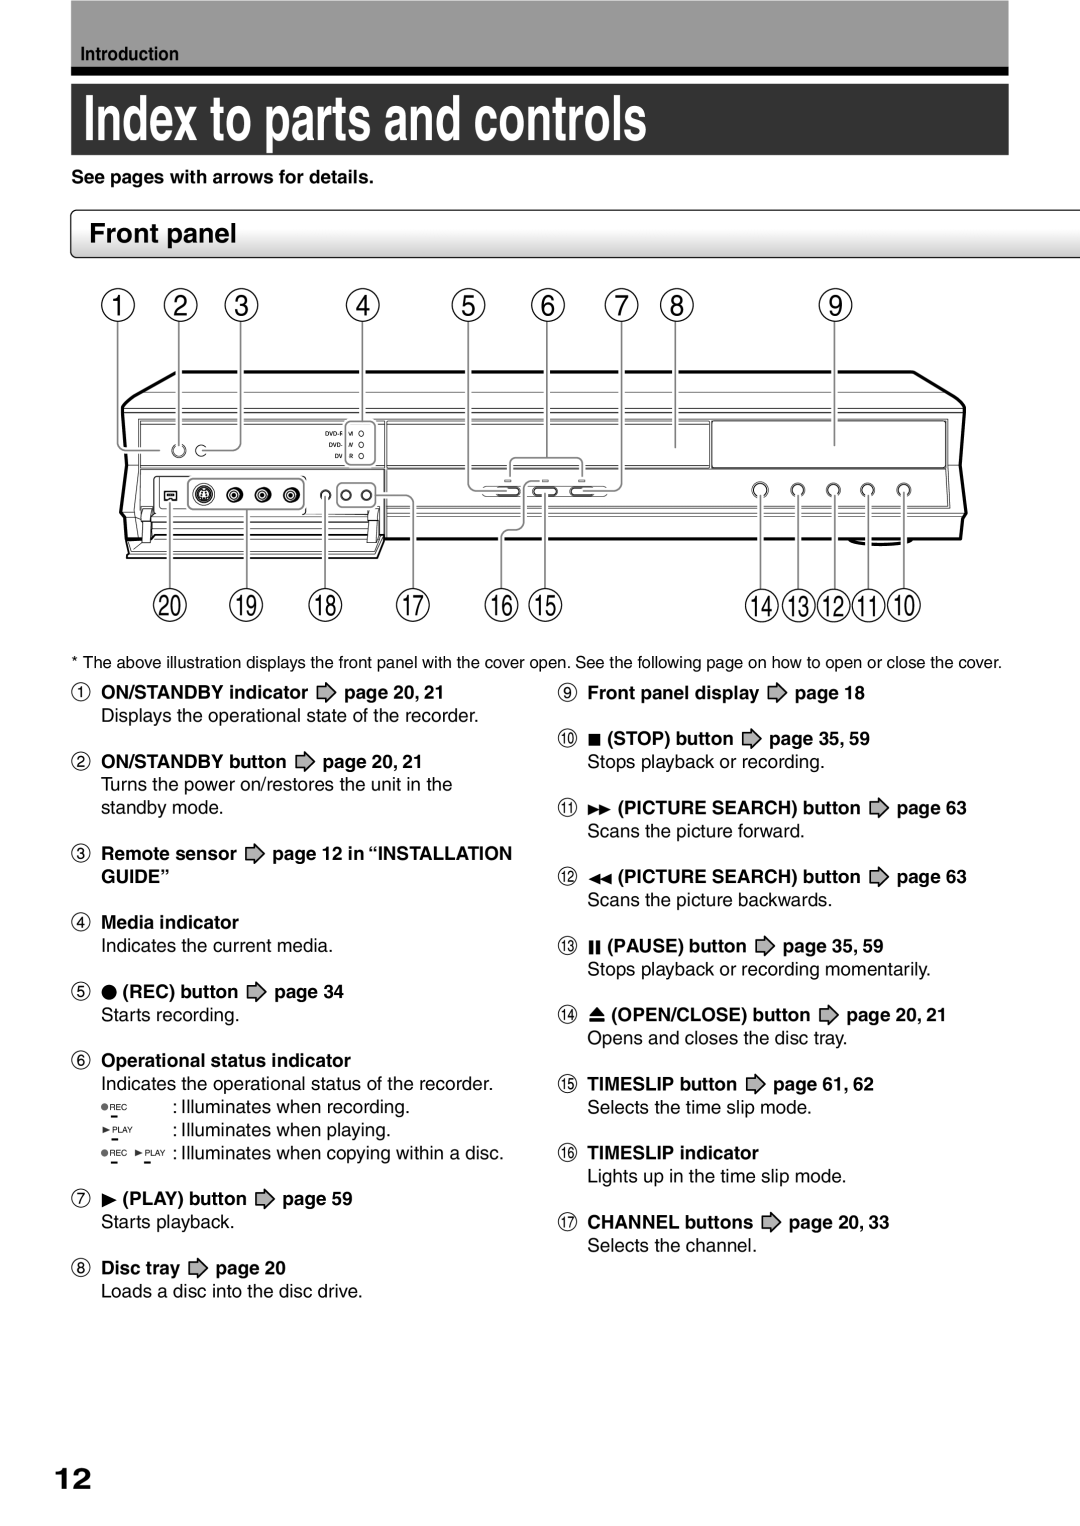 Toshiba D-R2SU Index to parts and controls, Front panel, See pages with arrows for details, ON/STANDBY indicator, page 20 